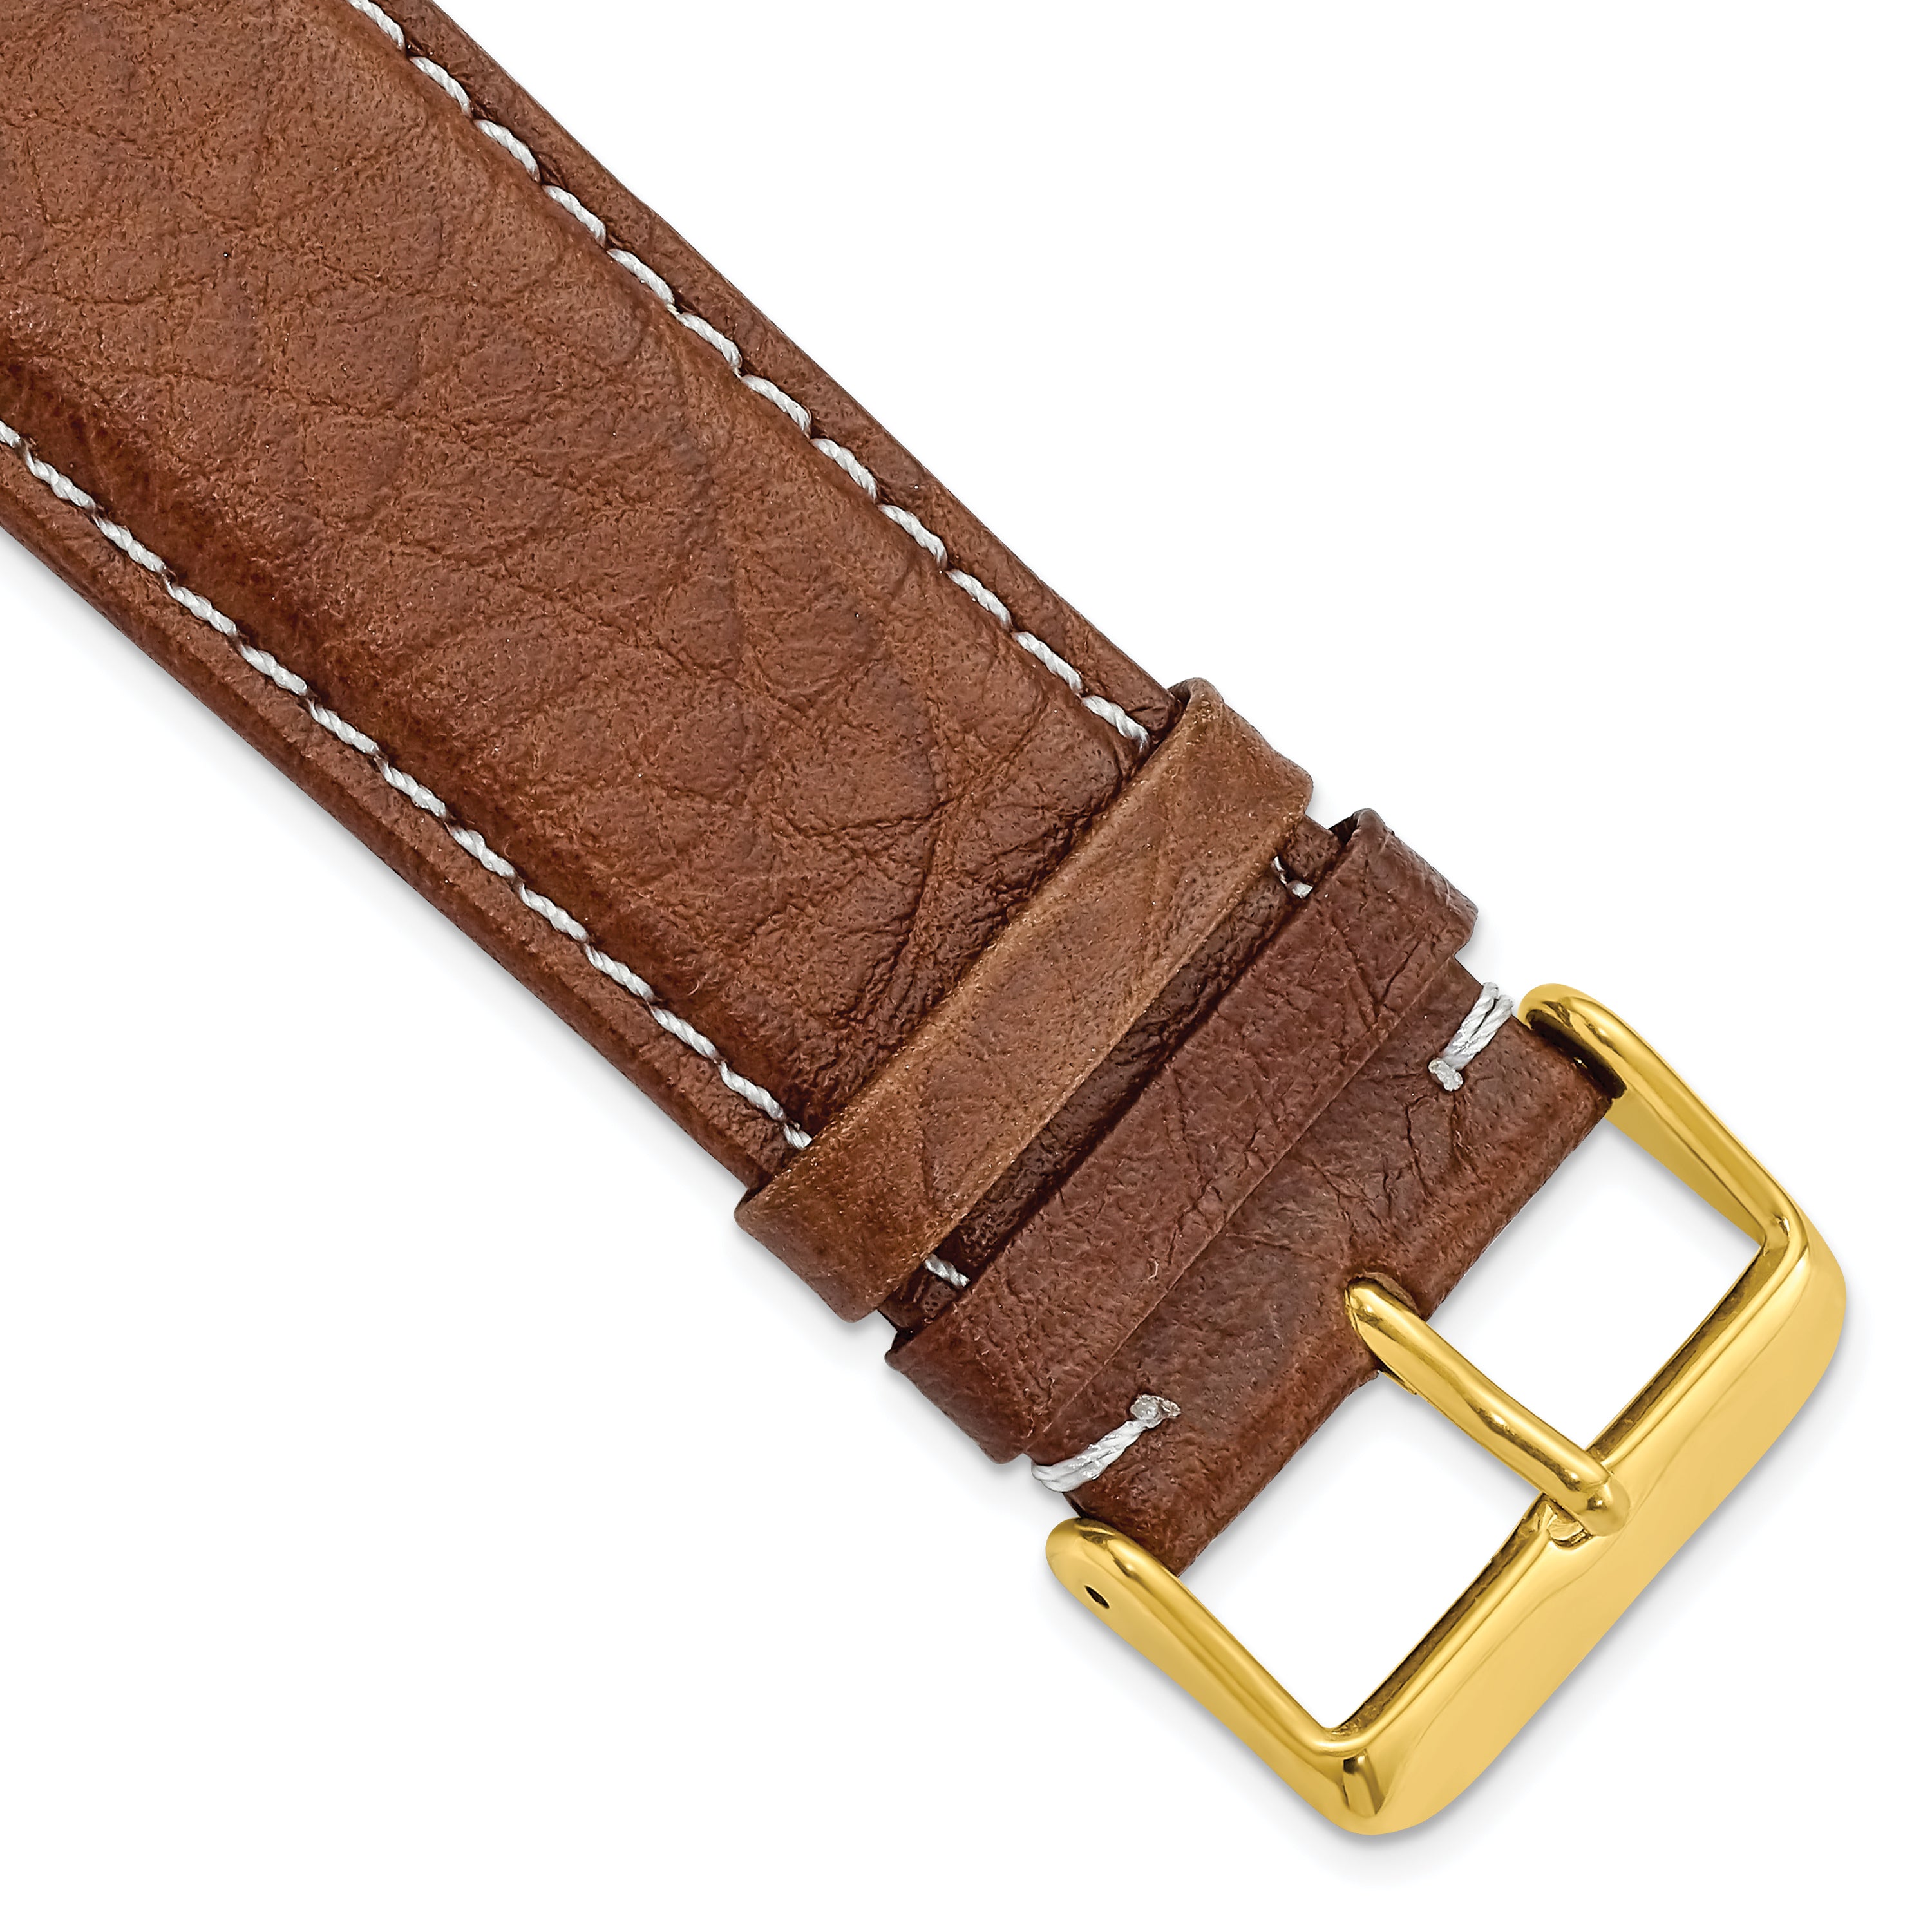 DeBeer 26mm Havana Sport Leather with White Stitching and Gold-tone Buckle 7.5 inch Watch Band